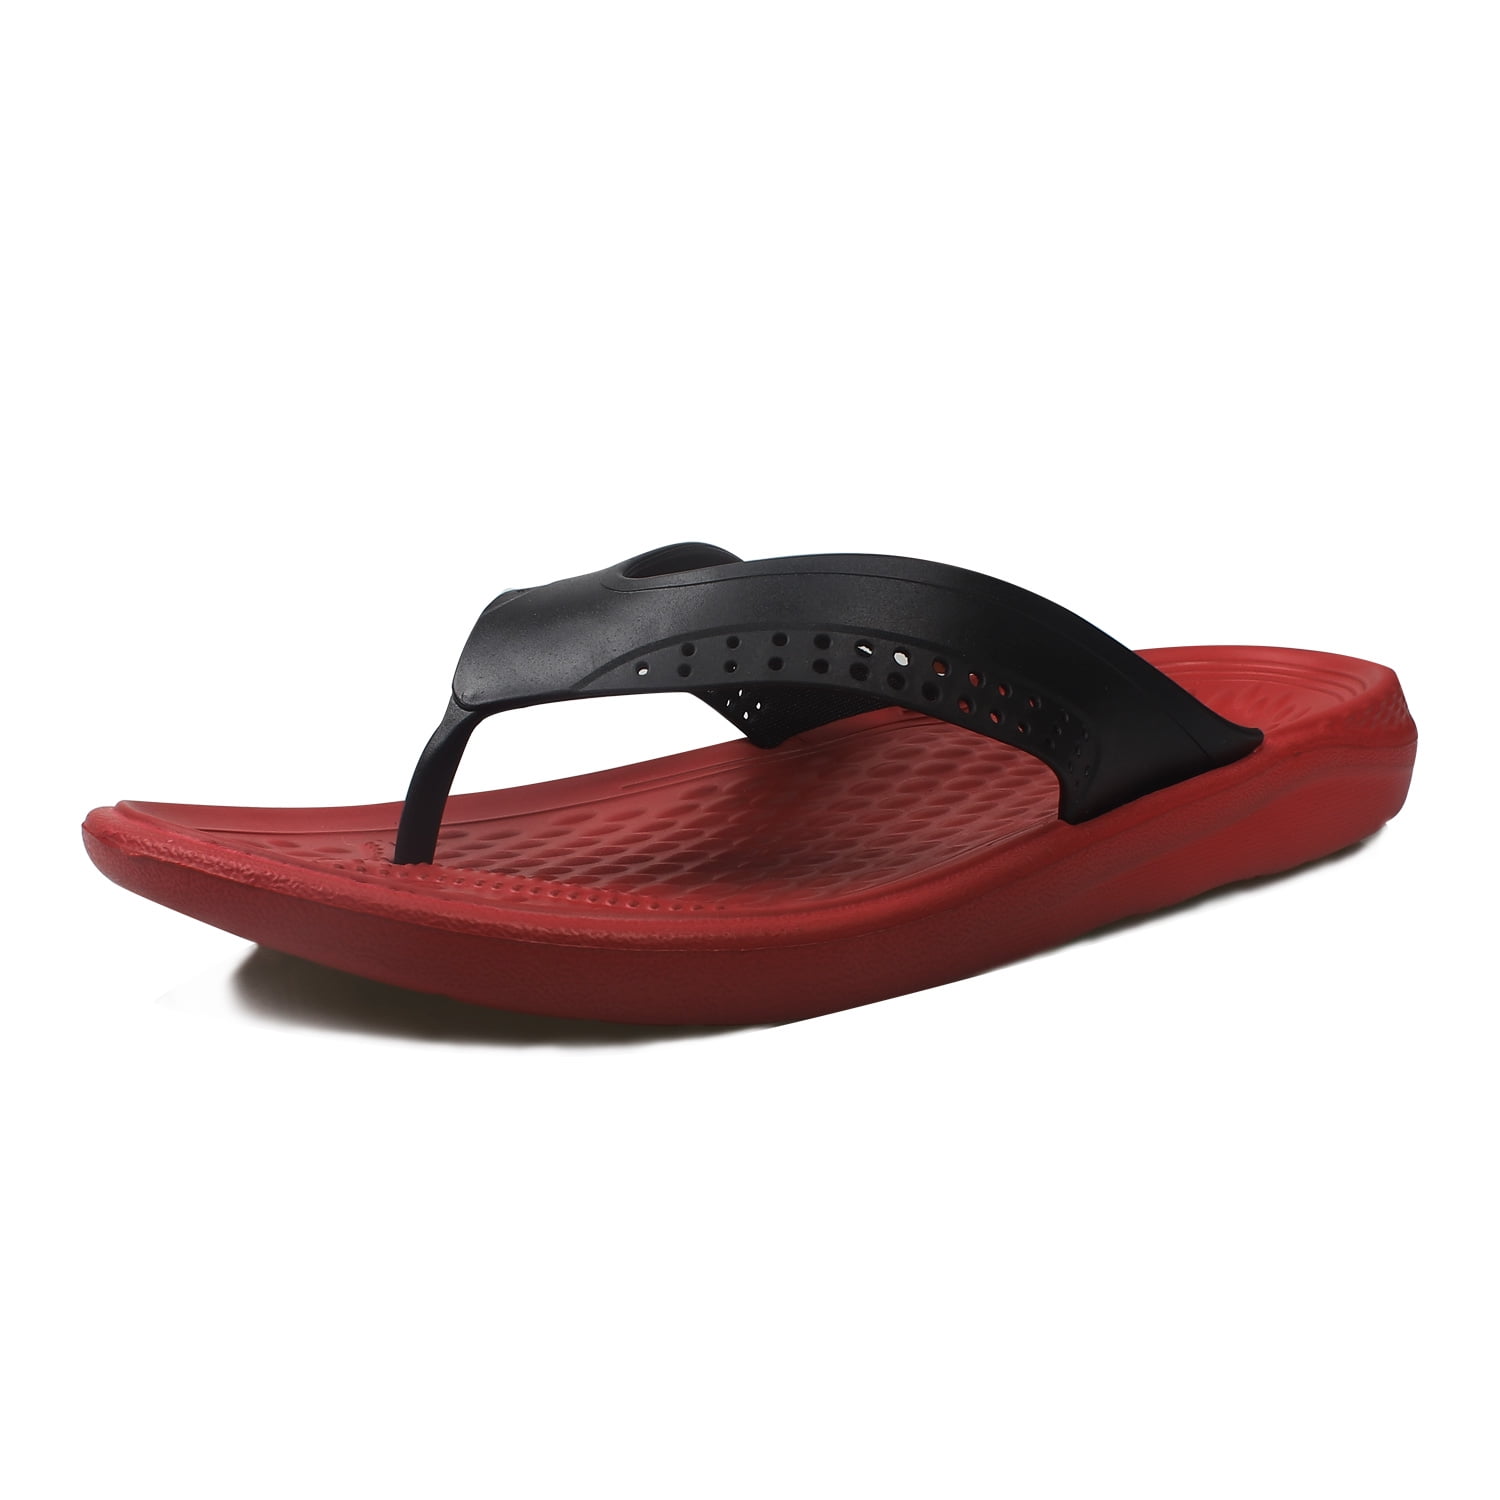 COL DOM Flip Flops Red Abstract Sandals Beach Slippers for Men/Women